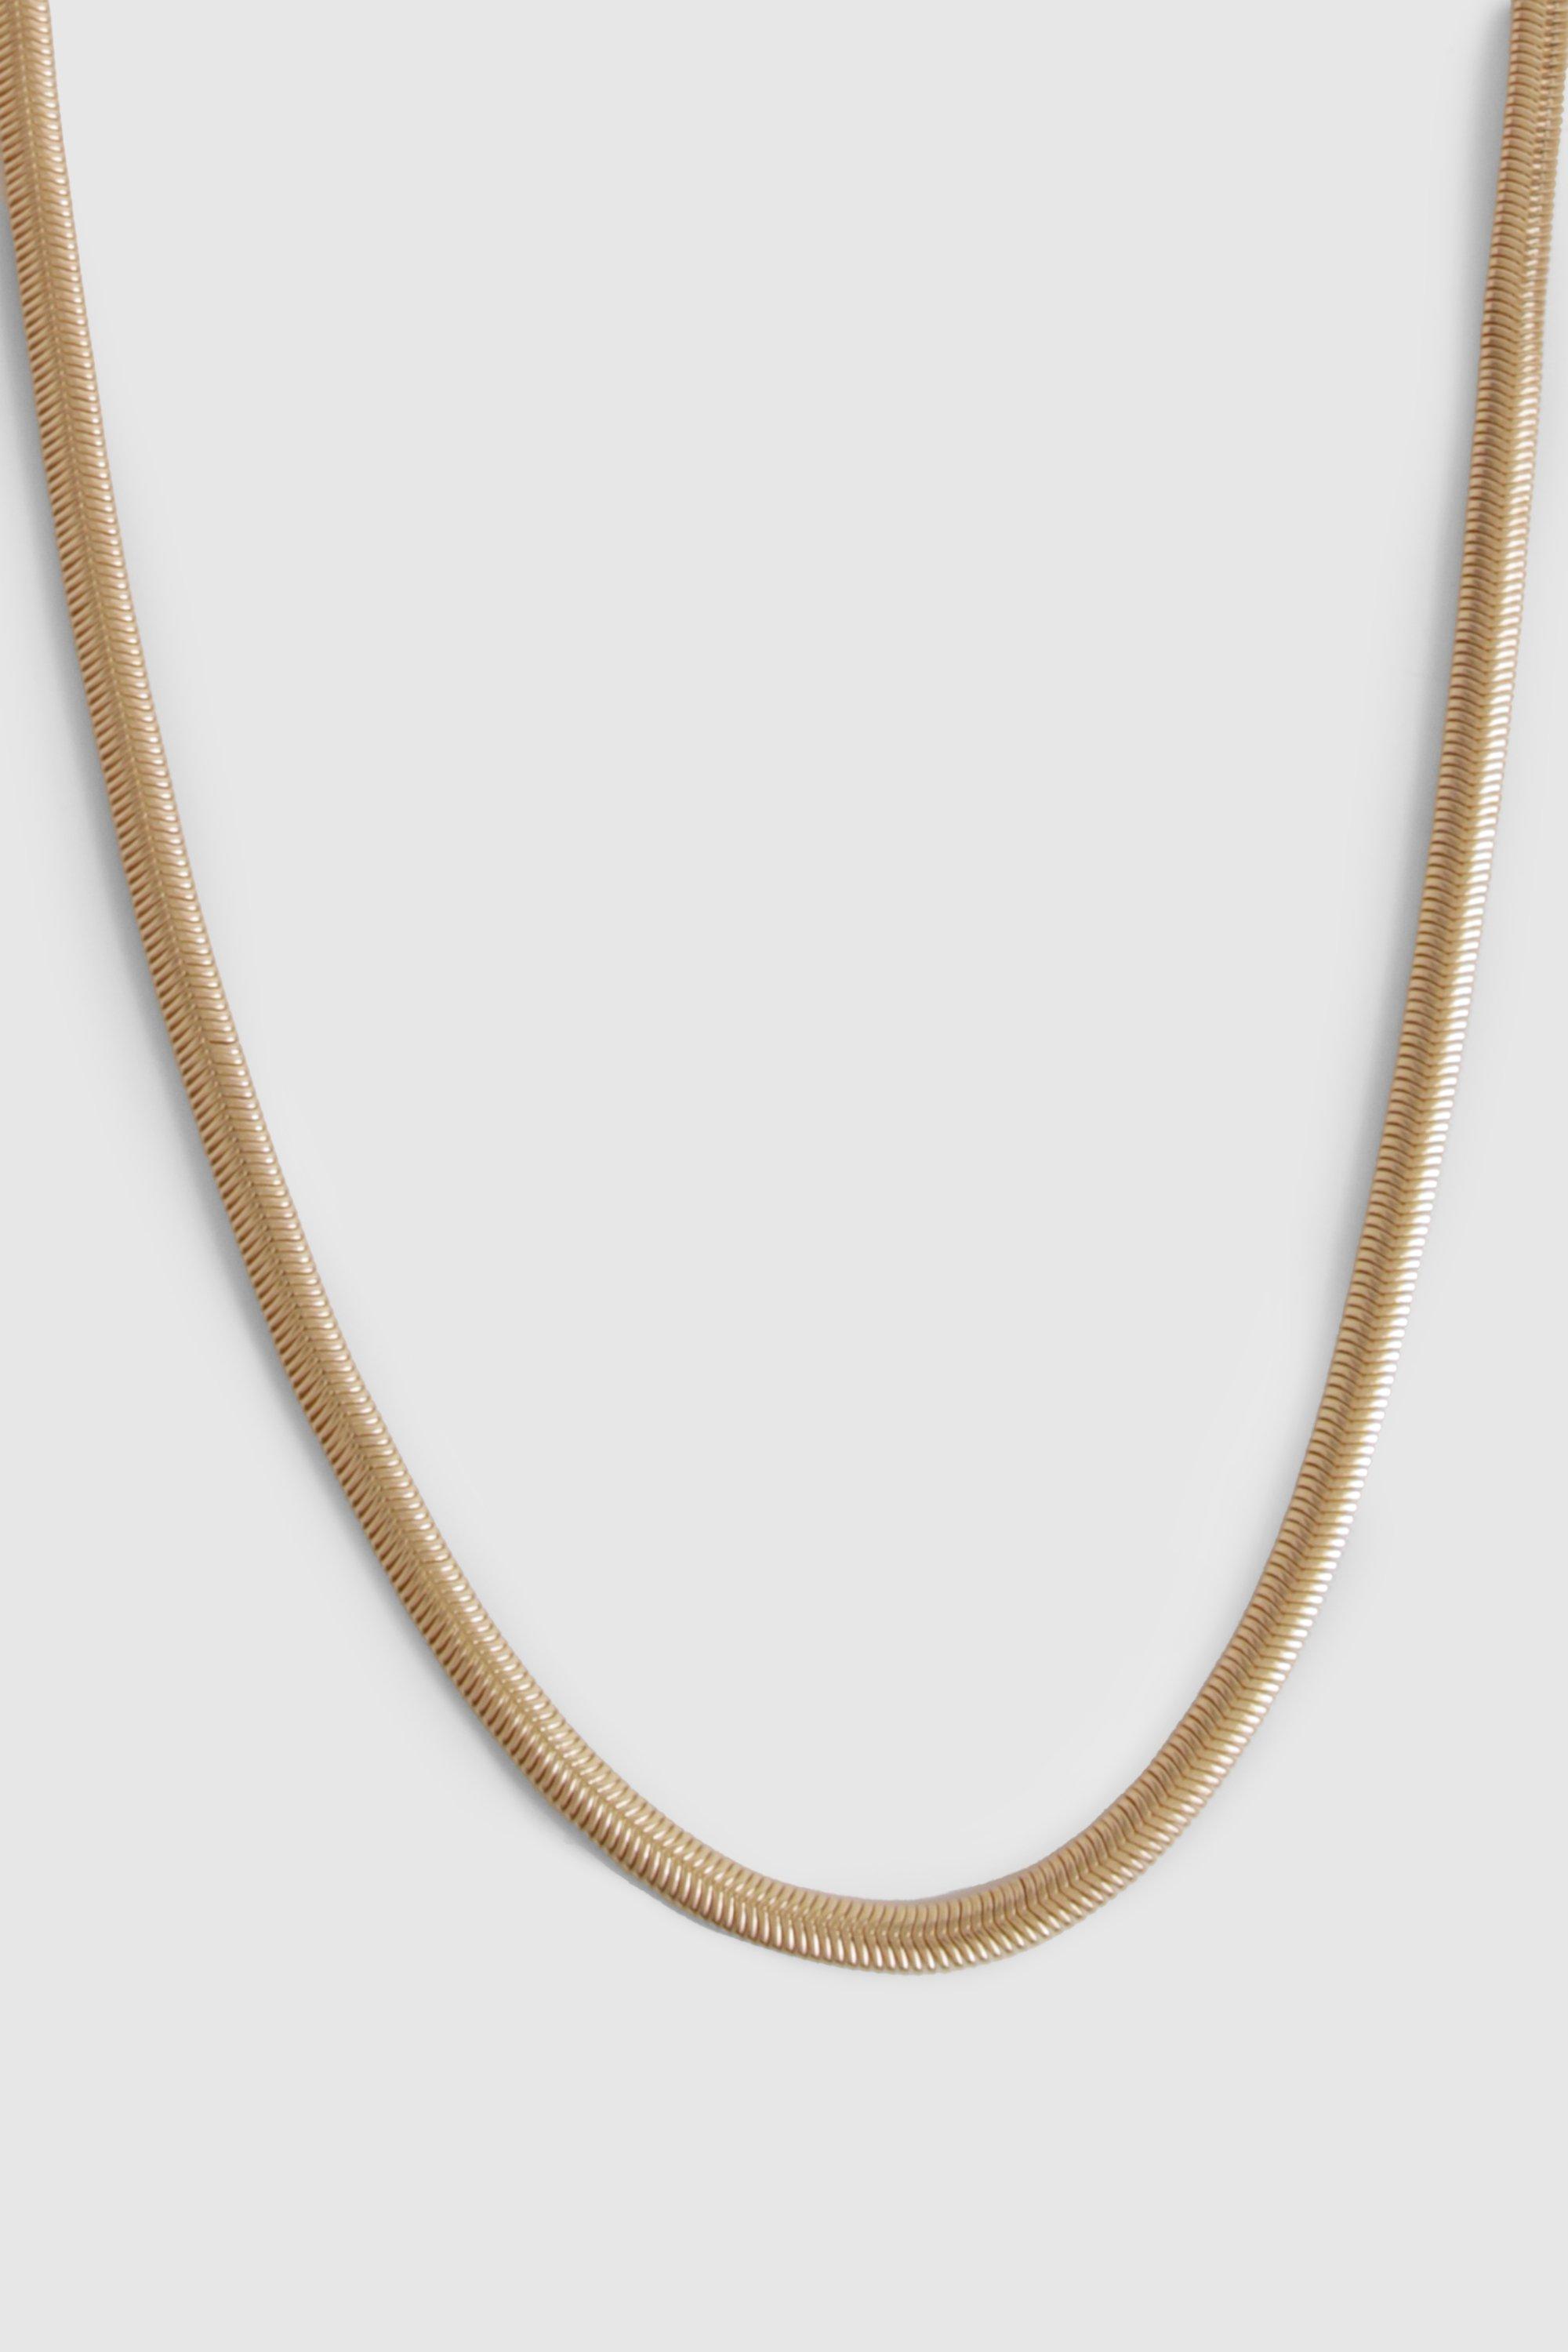 Image of Delicate Gold Flat Snake Chain Necklace, Metallics